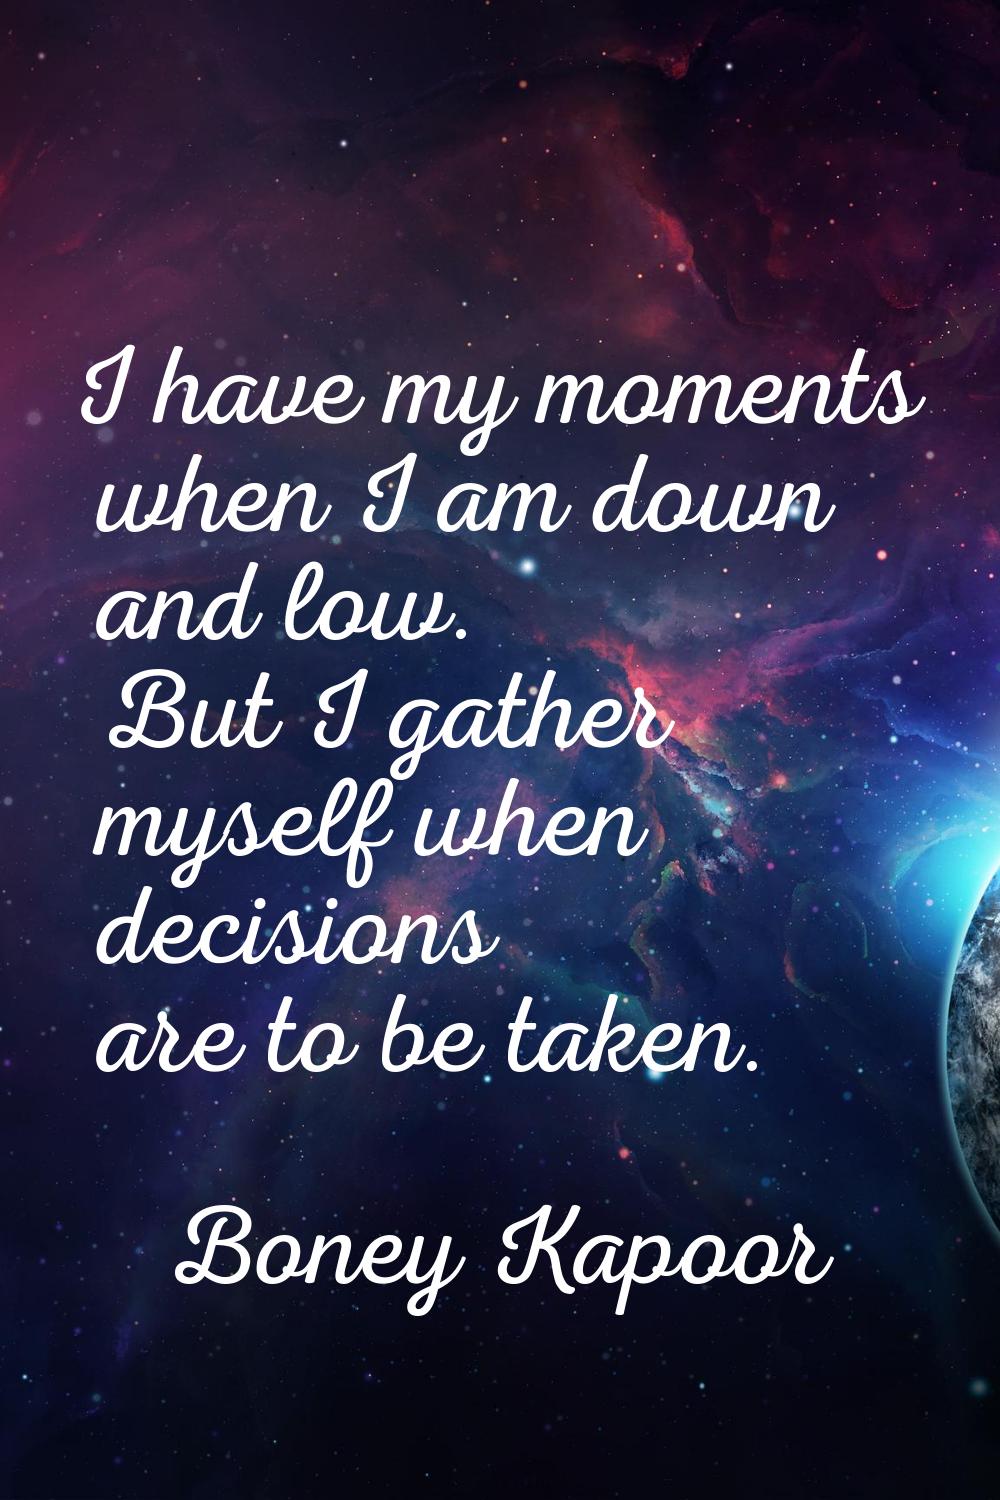 I have my moments when I am down and low. But I gather myself when decisions are to be taken.